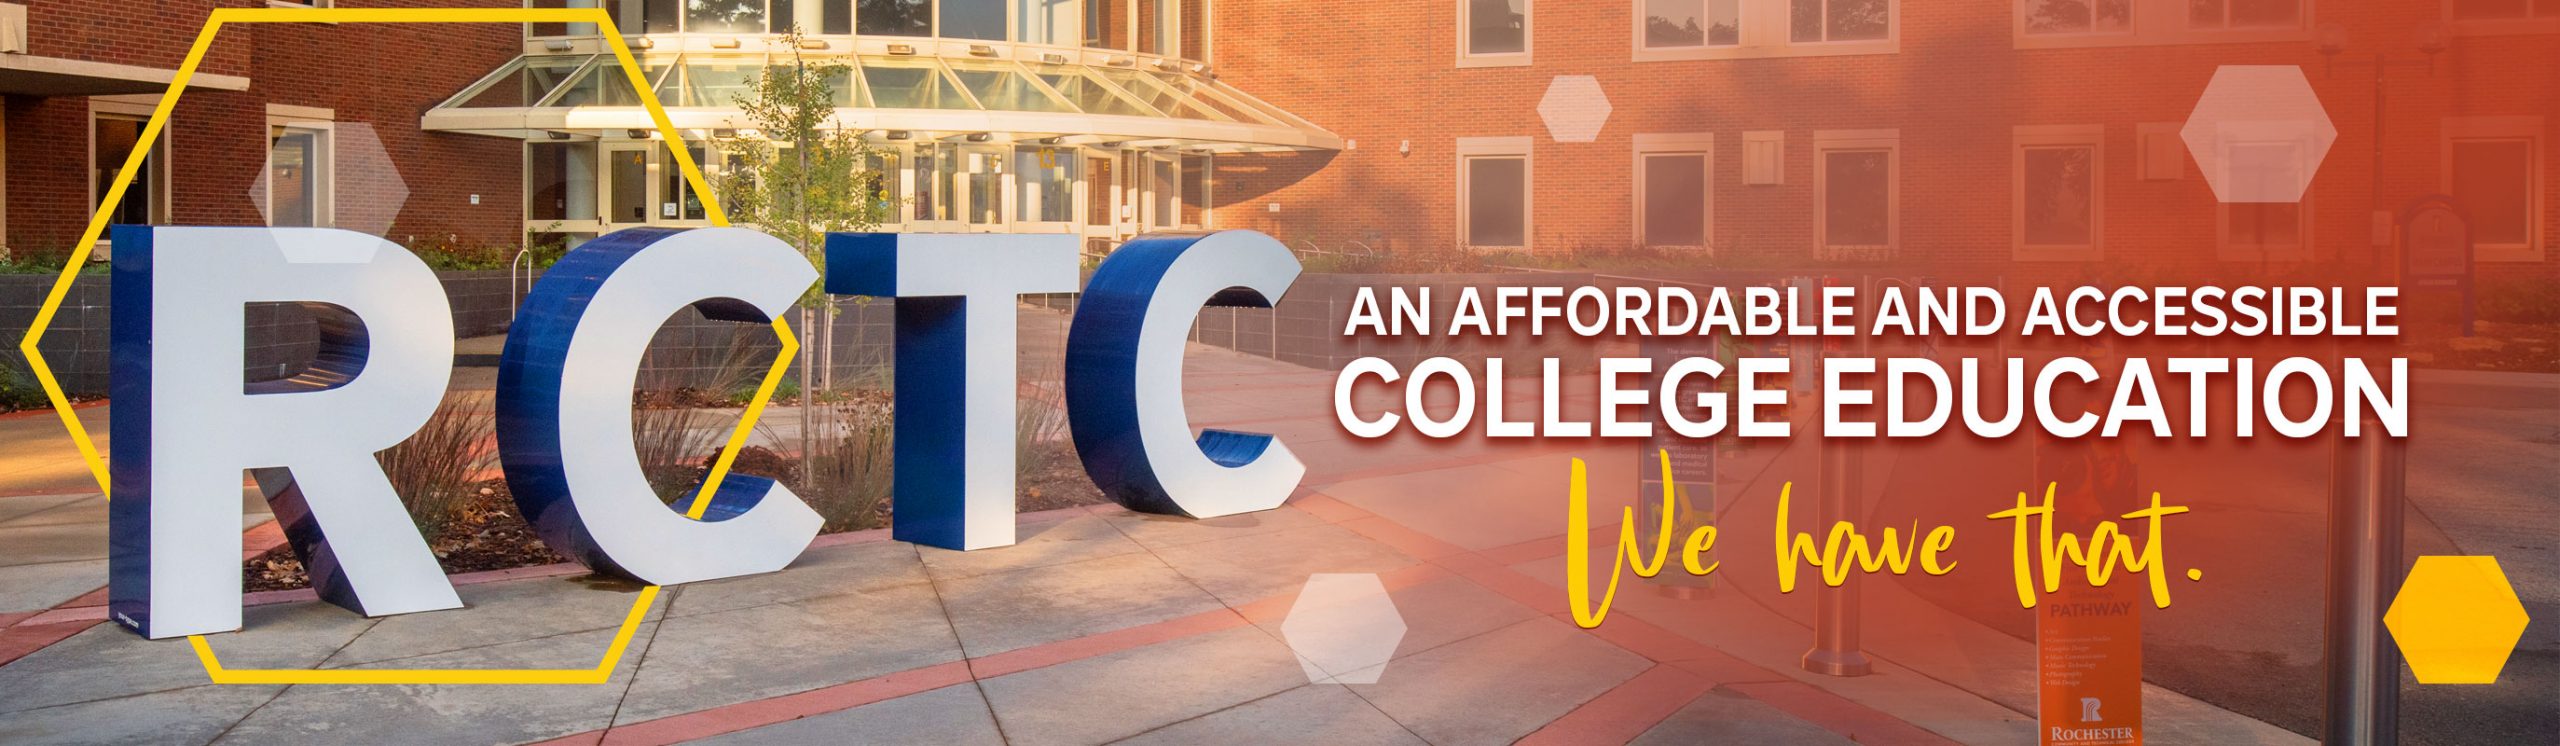 Affordable and Accessible College